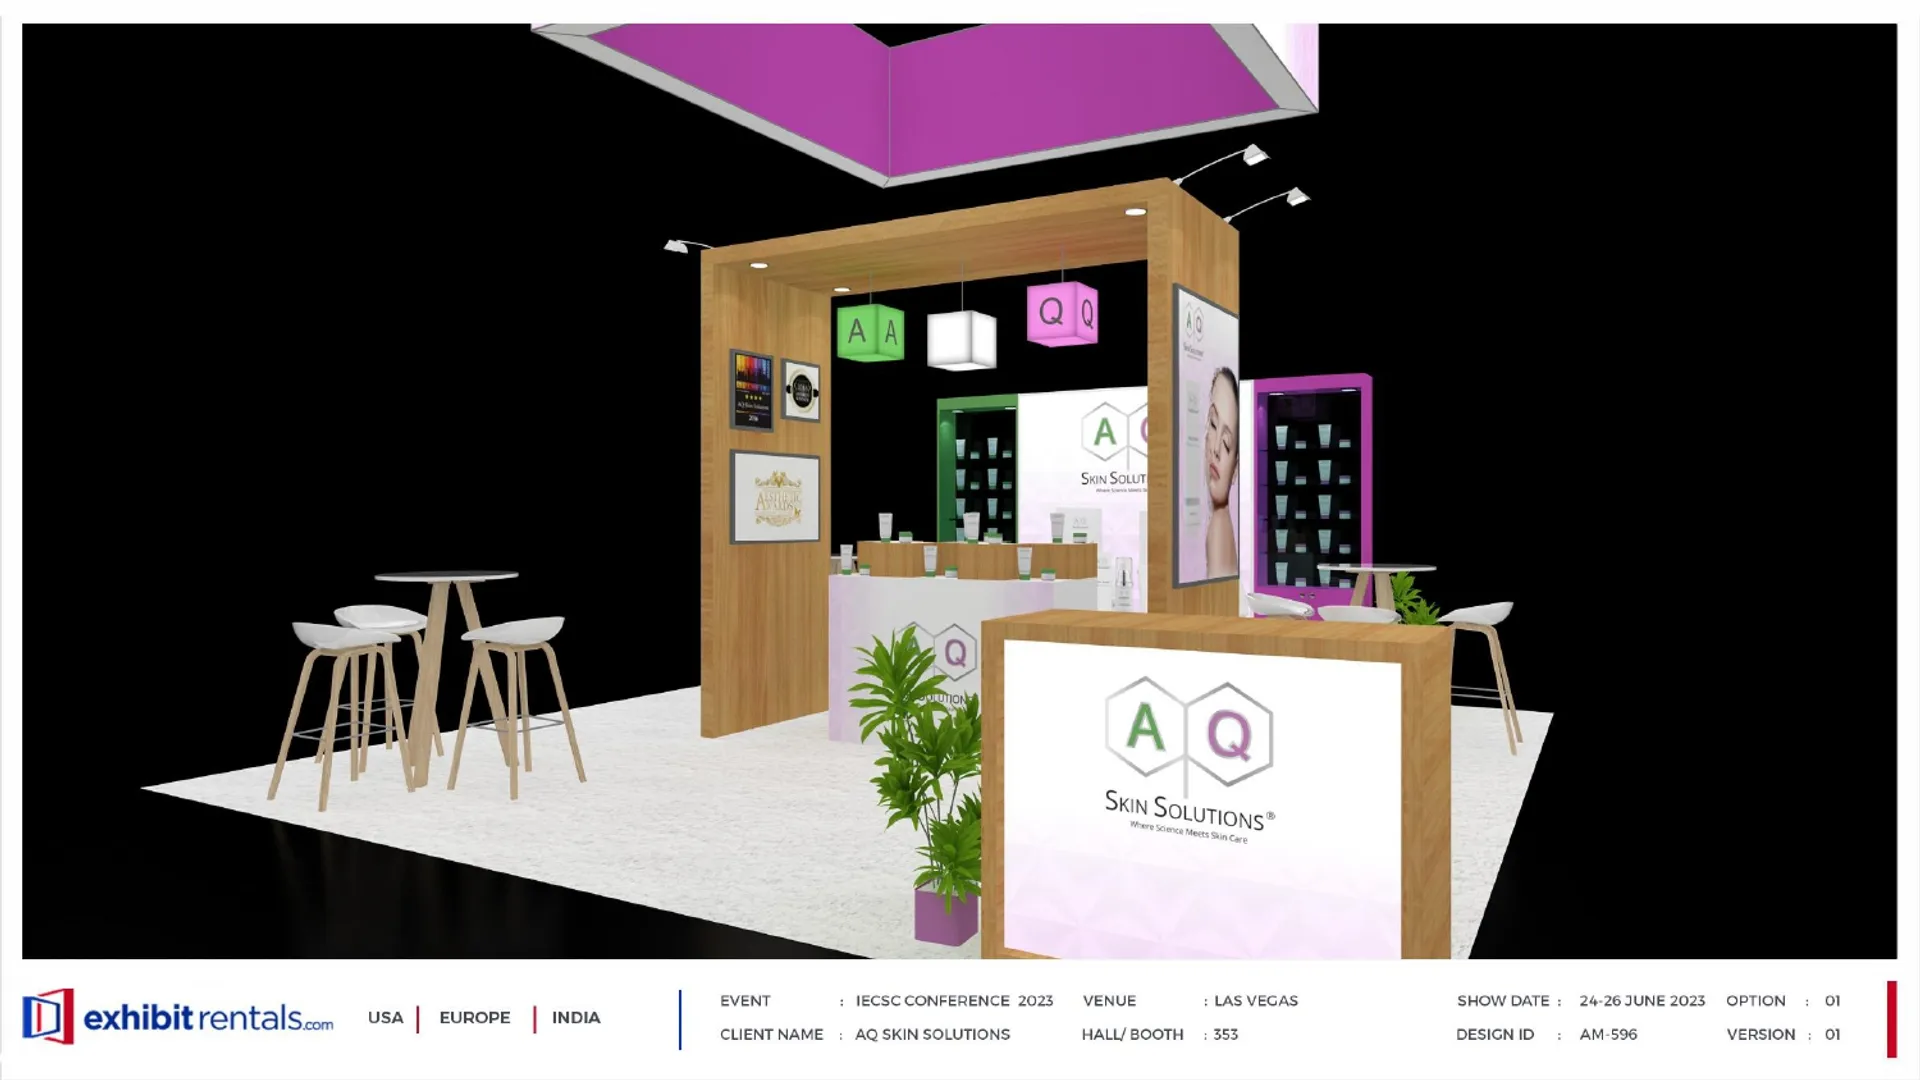 booth-design-projects/Exhibit-Rentals/2024-04-18-20x20-ISLAND-Project-85/1.1_AQ Skin Solutions_IECSC Conference_ER design proposal -21_page-0001-44szyg.jpg